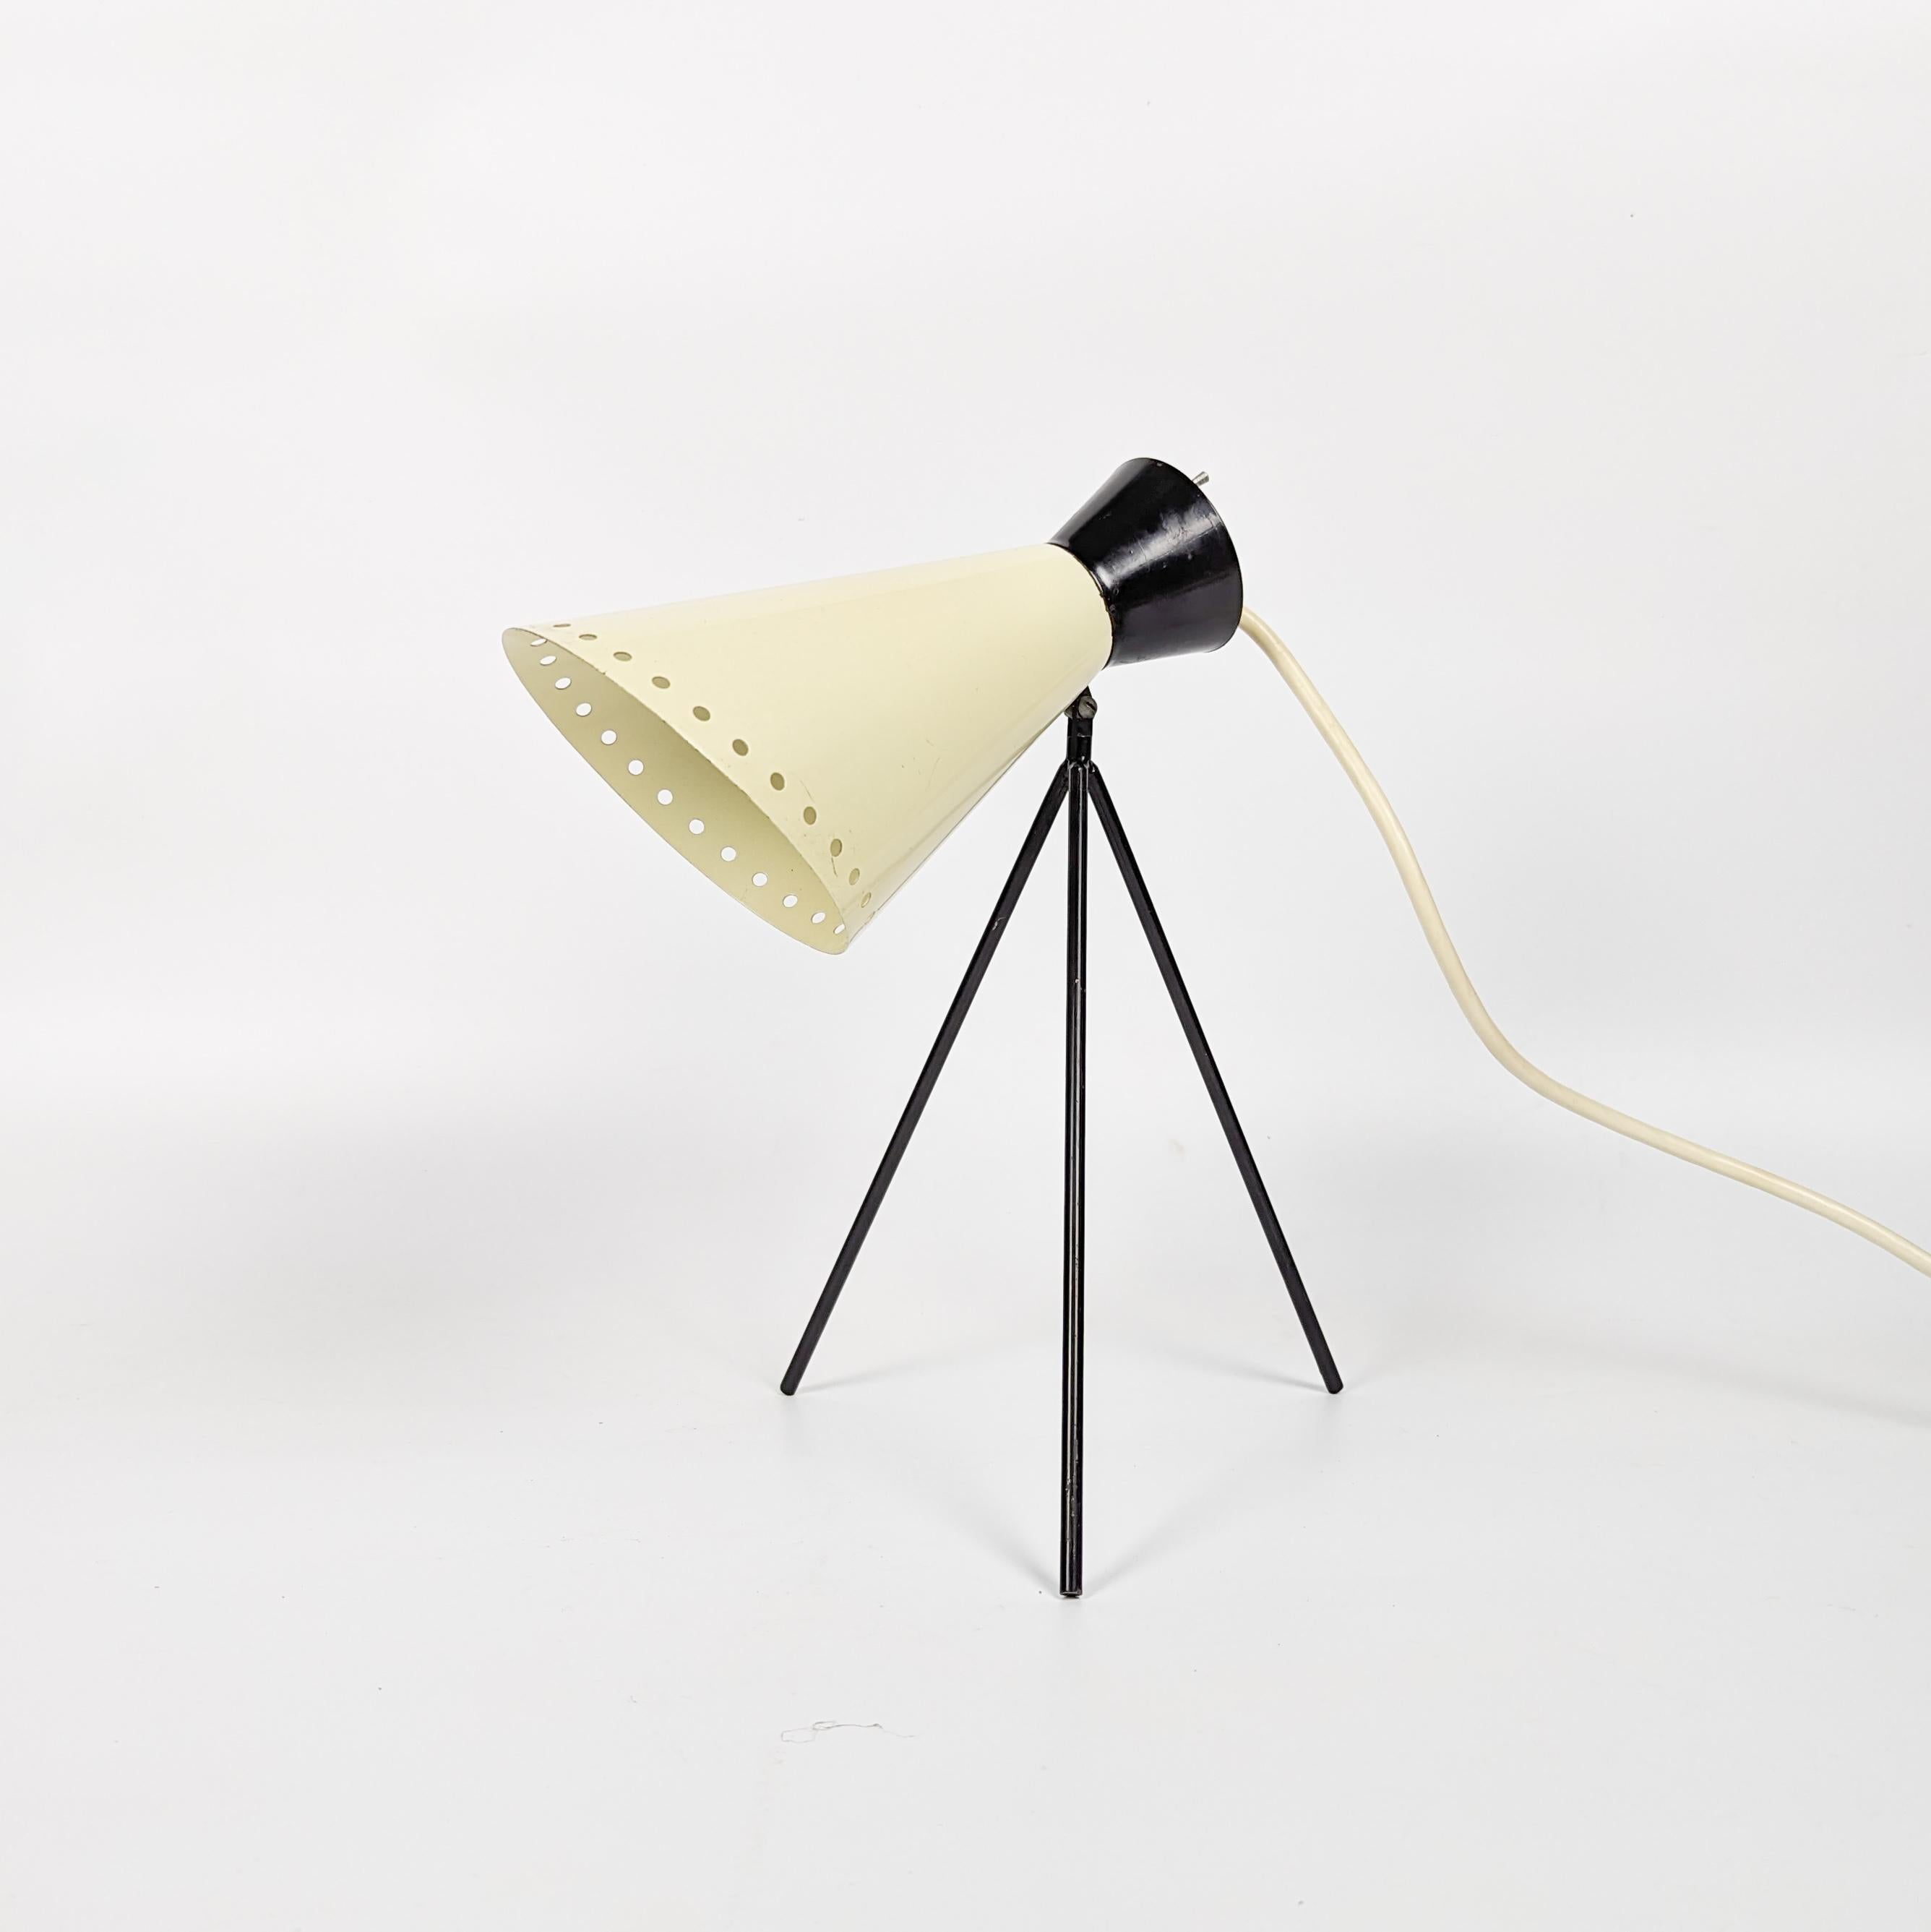 Fantastic mid-century modern tripod table lamp designed by Josef Hurka, featuring a beautiful 1950s design in the classic beige and black color scheme. Crafted by Napako in Czech Republic, this lamp stands as an absolute design classic from the